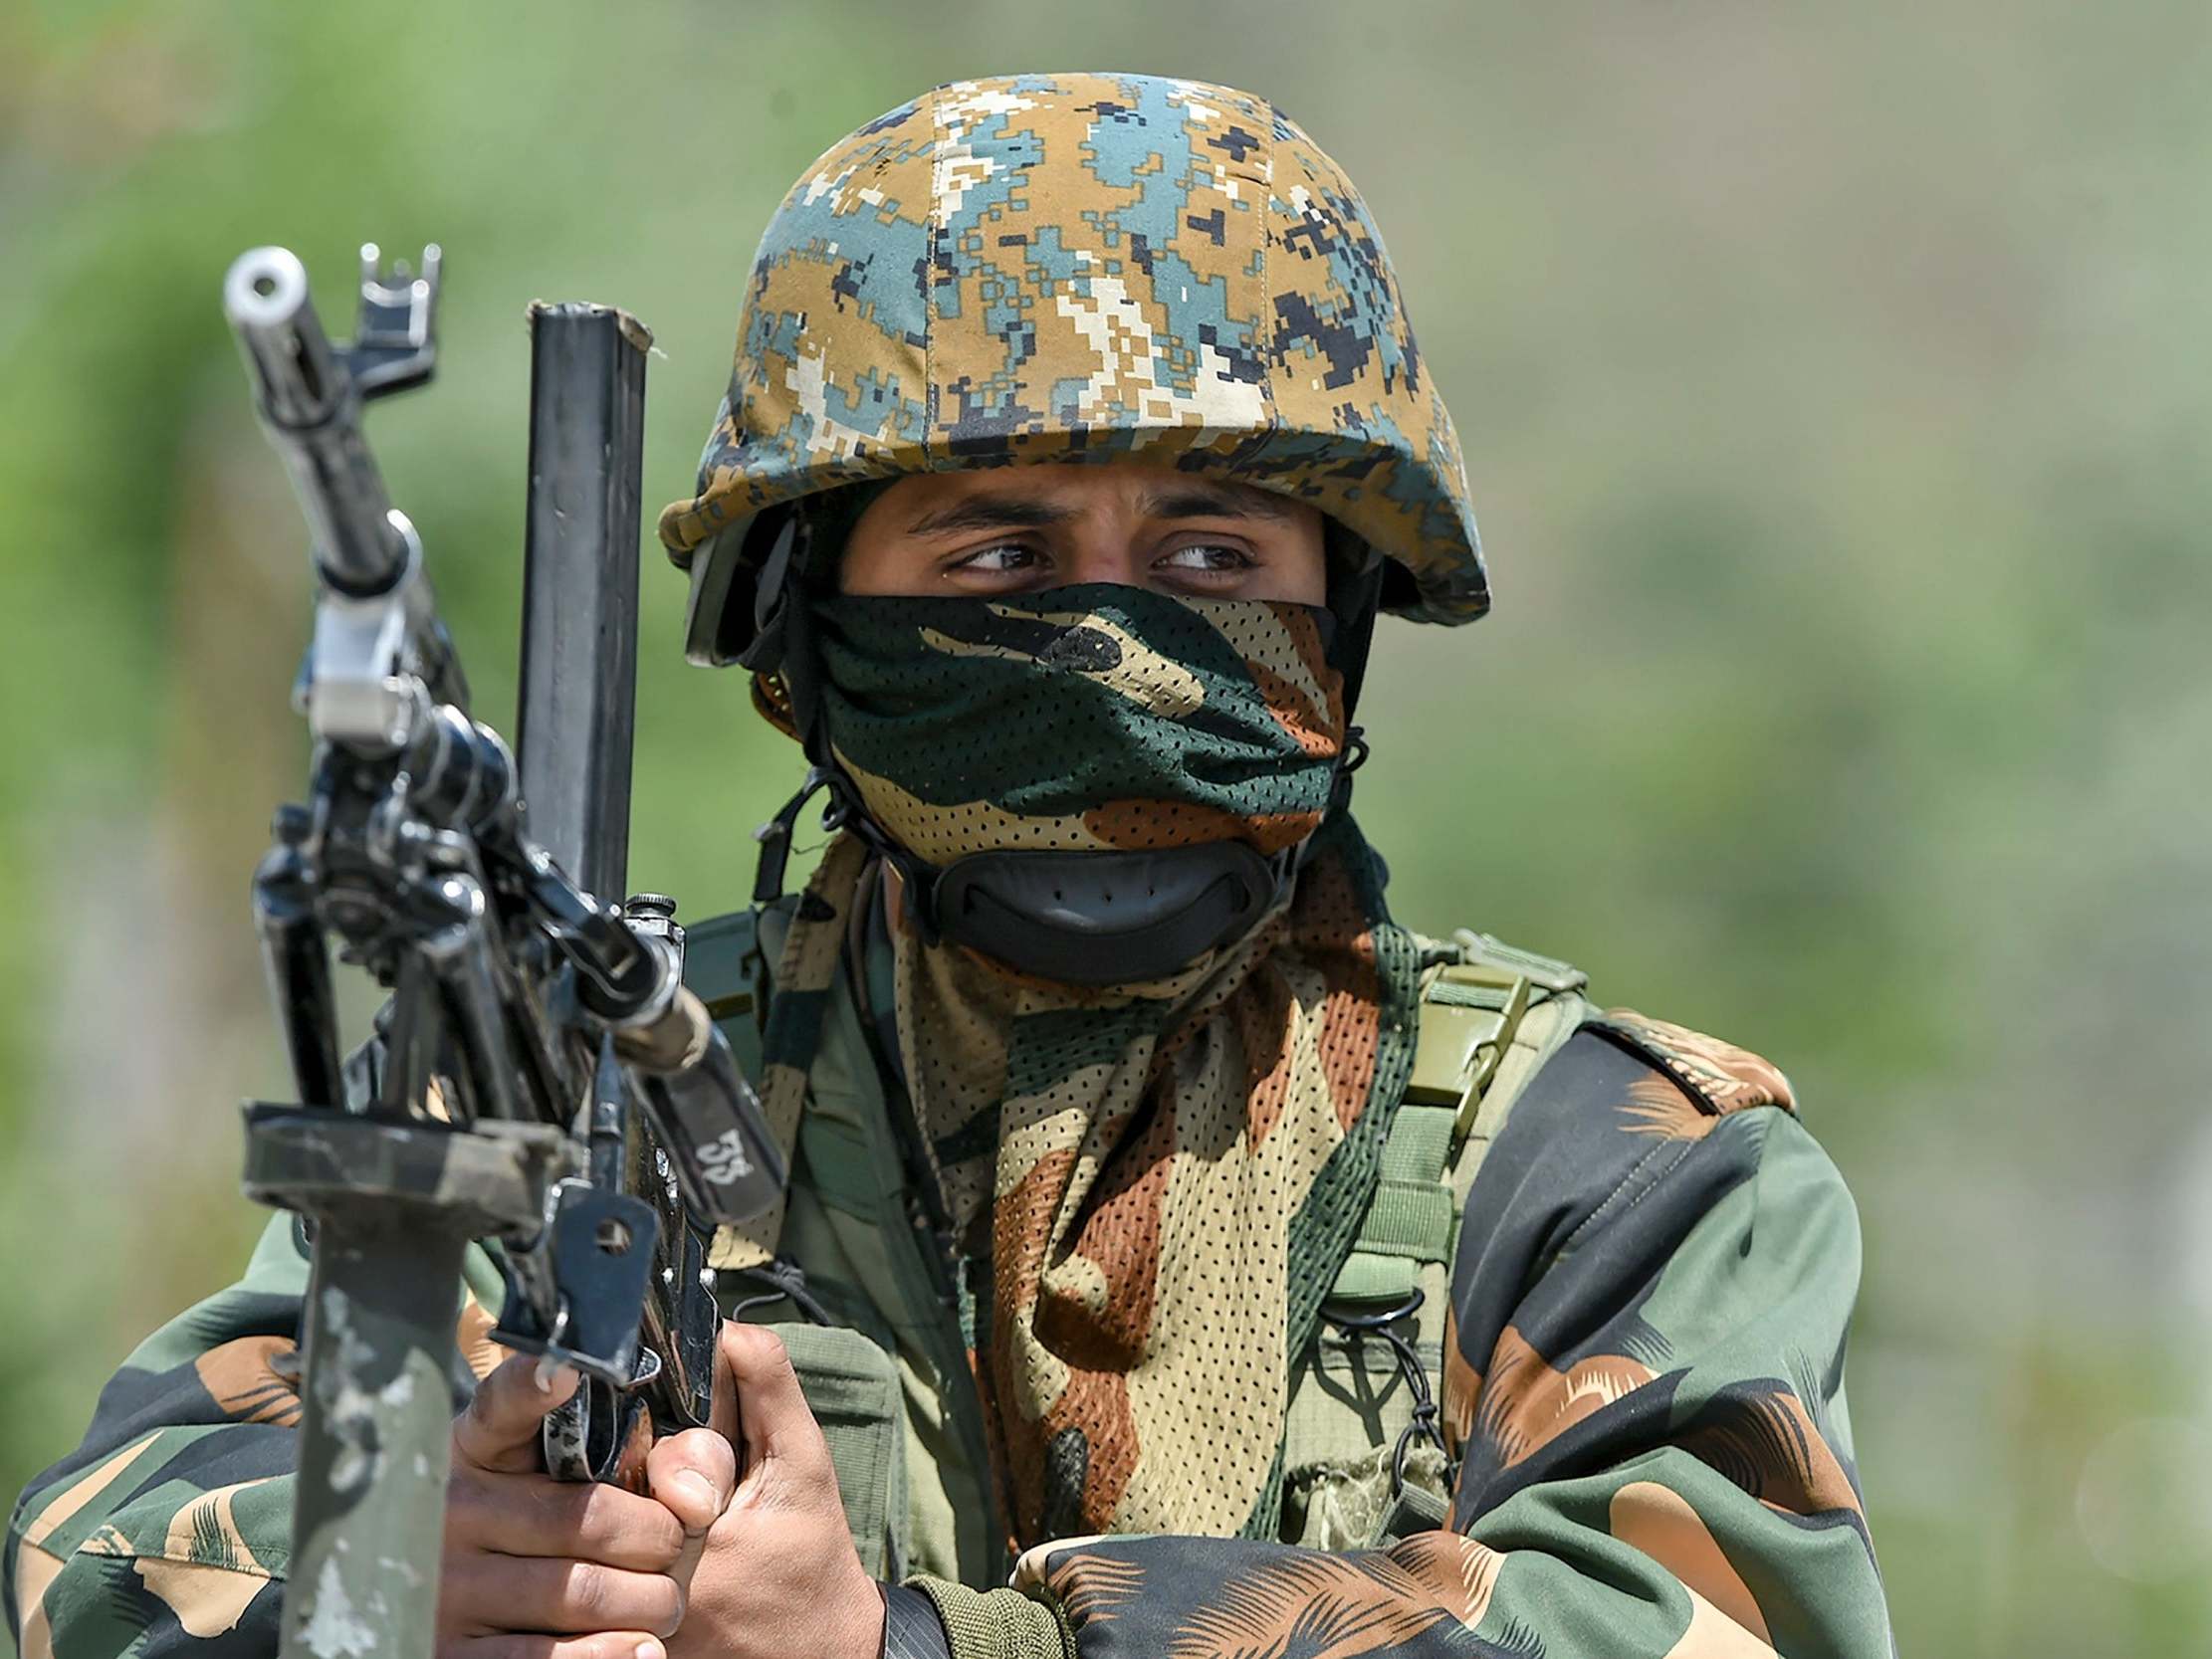 Four soldiers in the Indian Army were injured during the face-off on Saturday